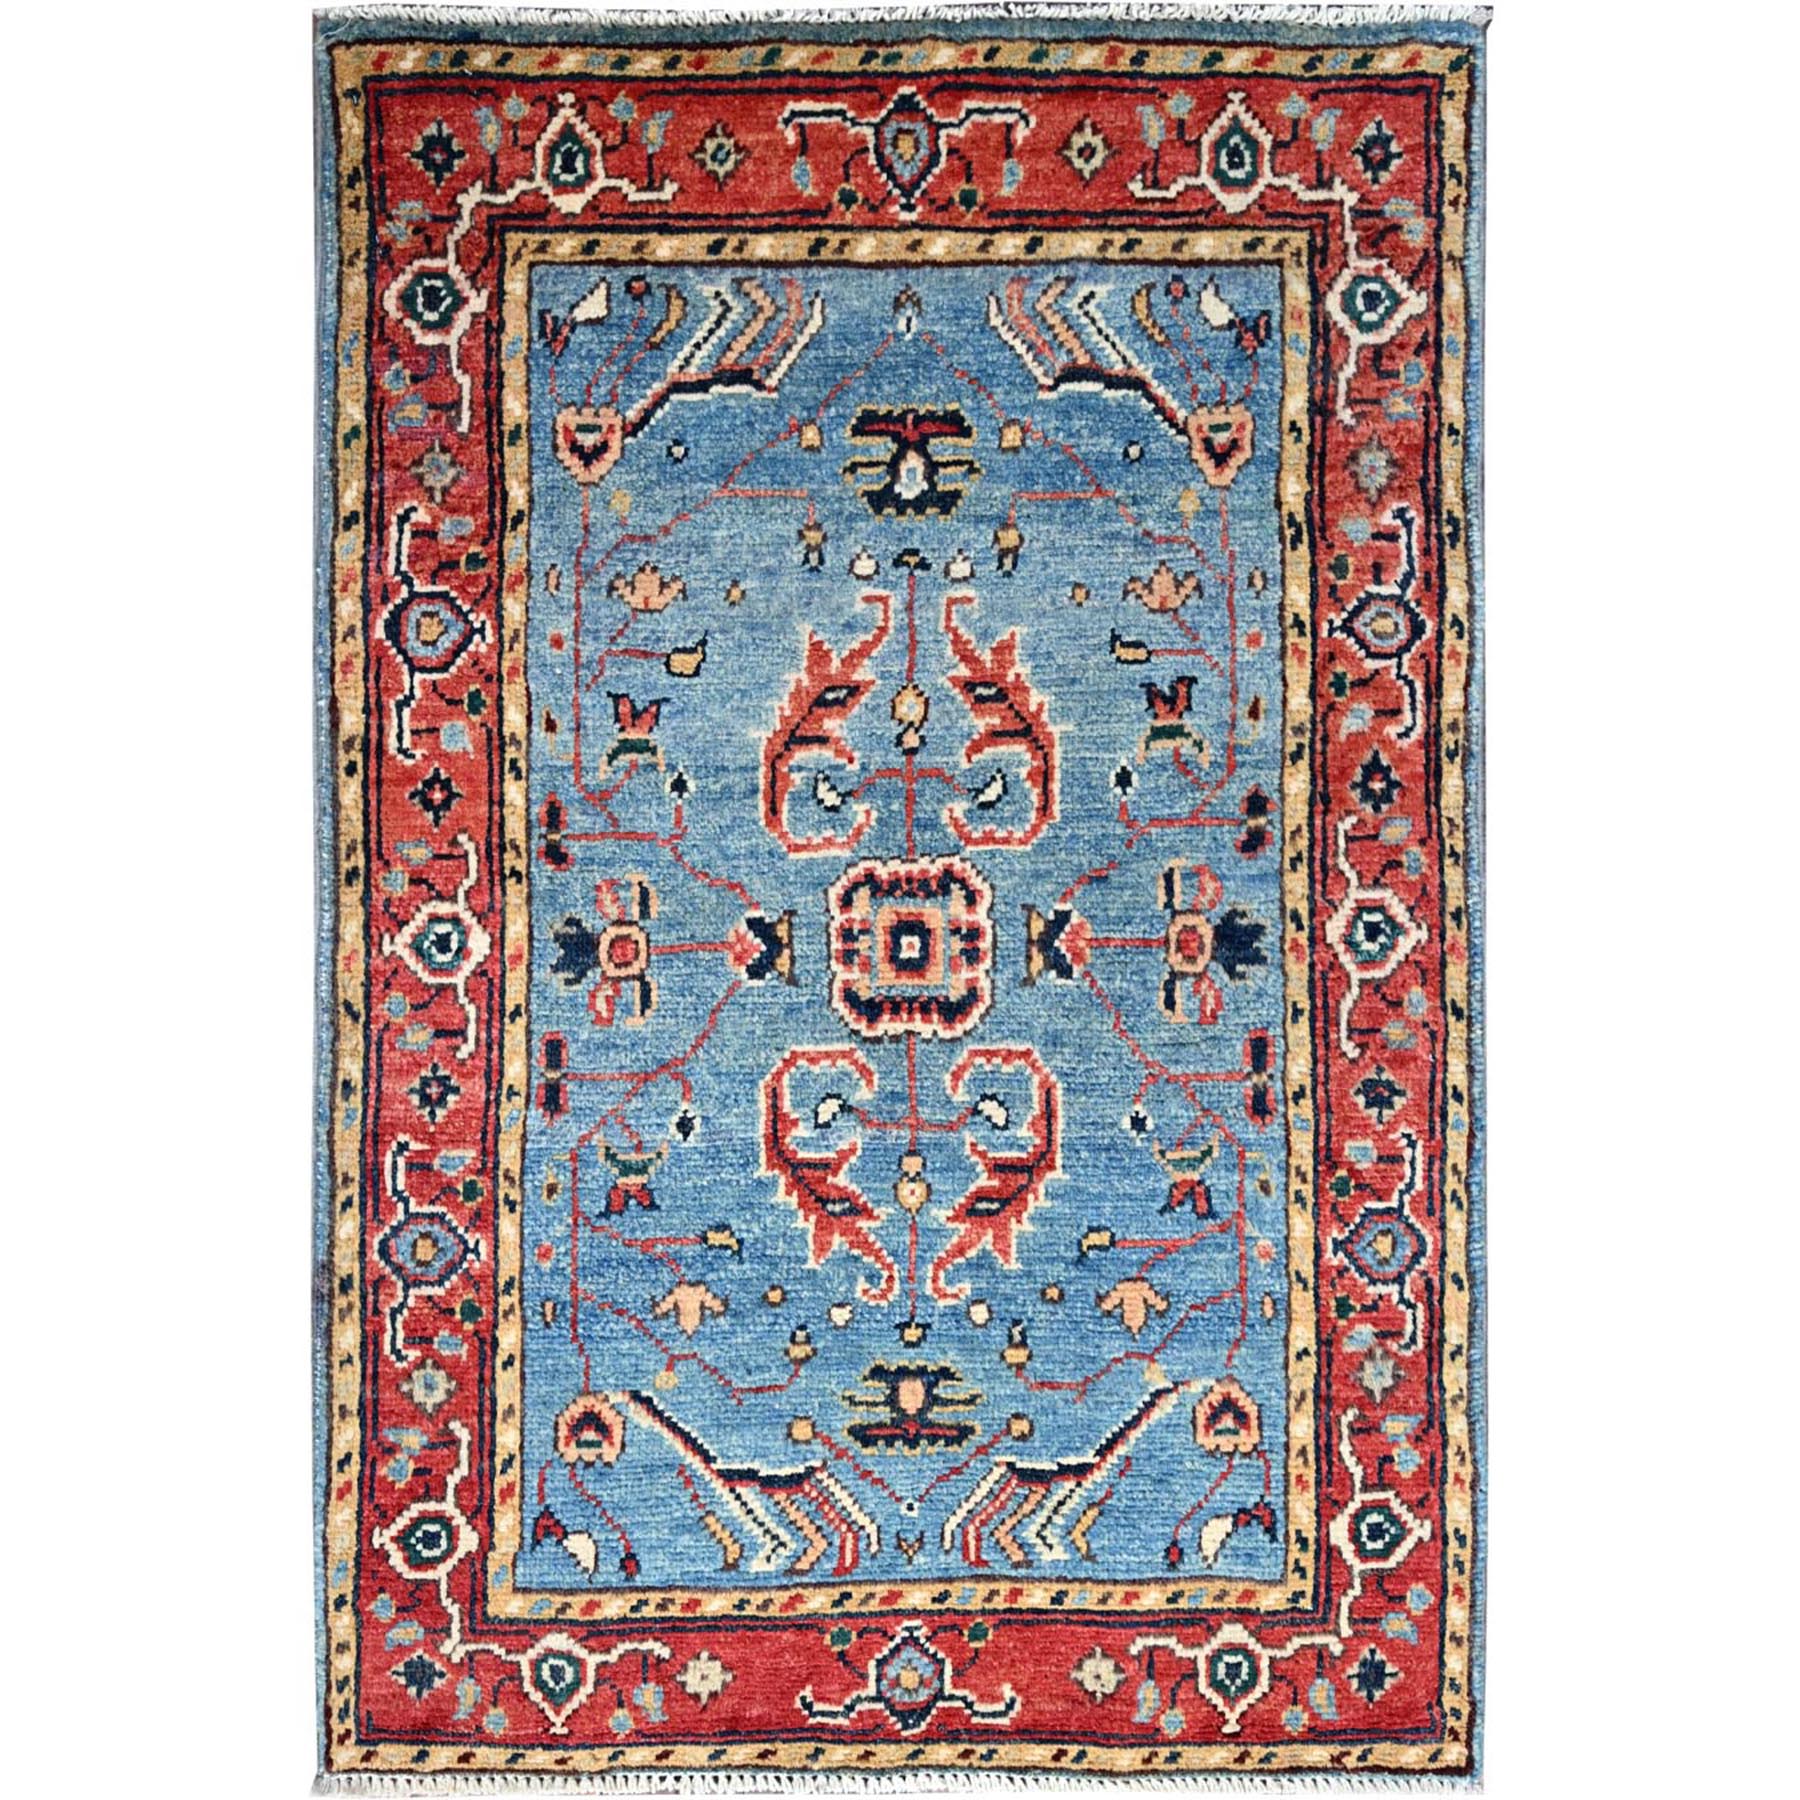  Wool Hand-Knotted Area Rug 1'11